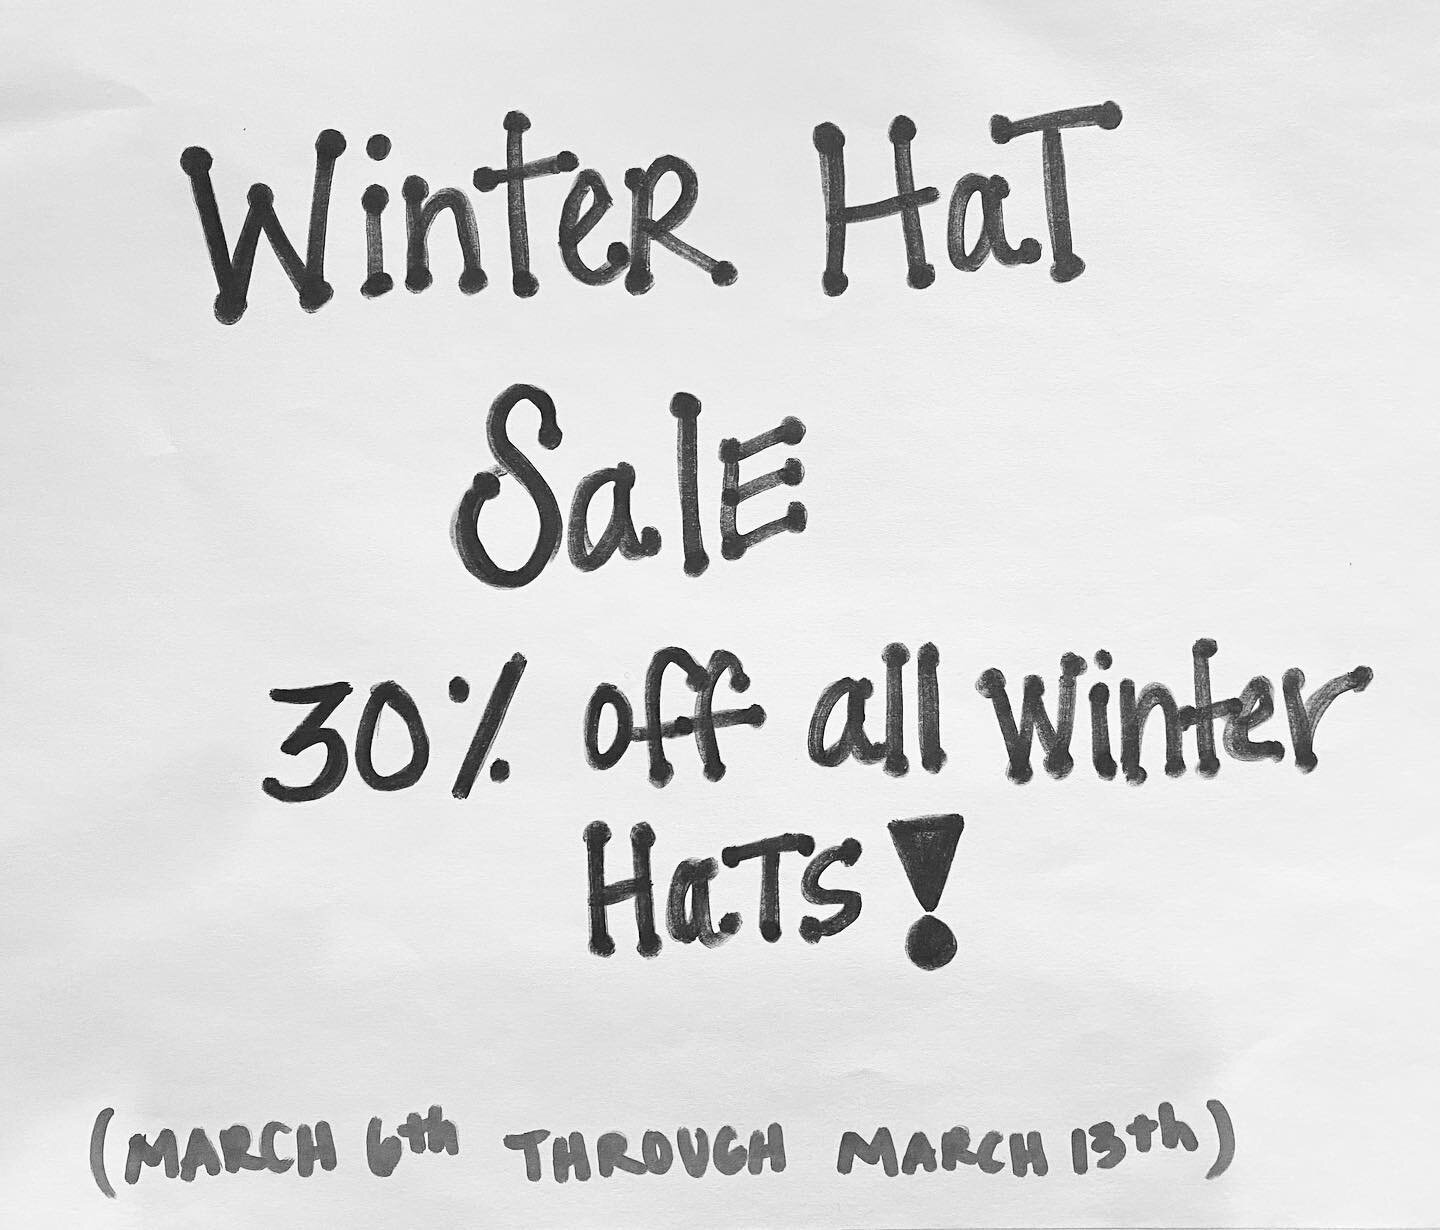 Spring is coming. It&rsquo;s time to make room for Spring Collection, so we&rsquo;re giving 30% off all Winter hats starting 3/6 through 3/13!